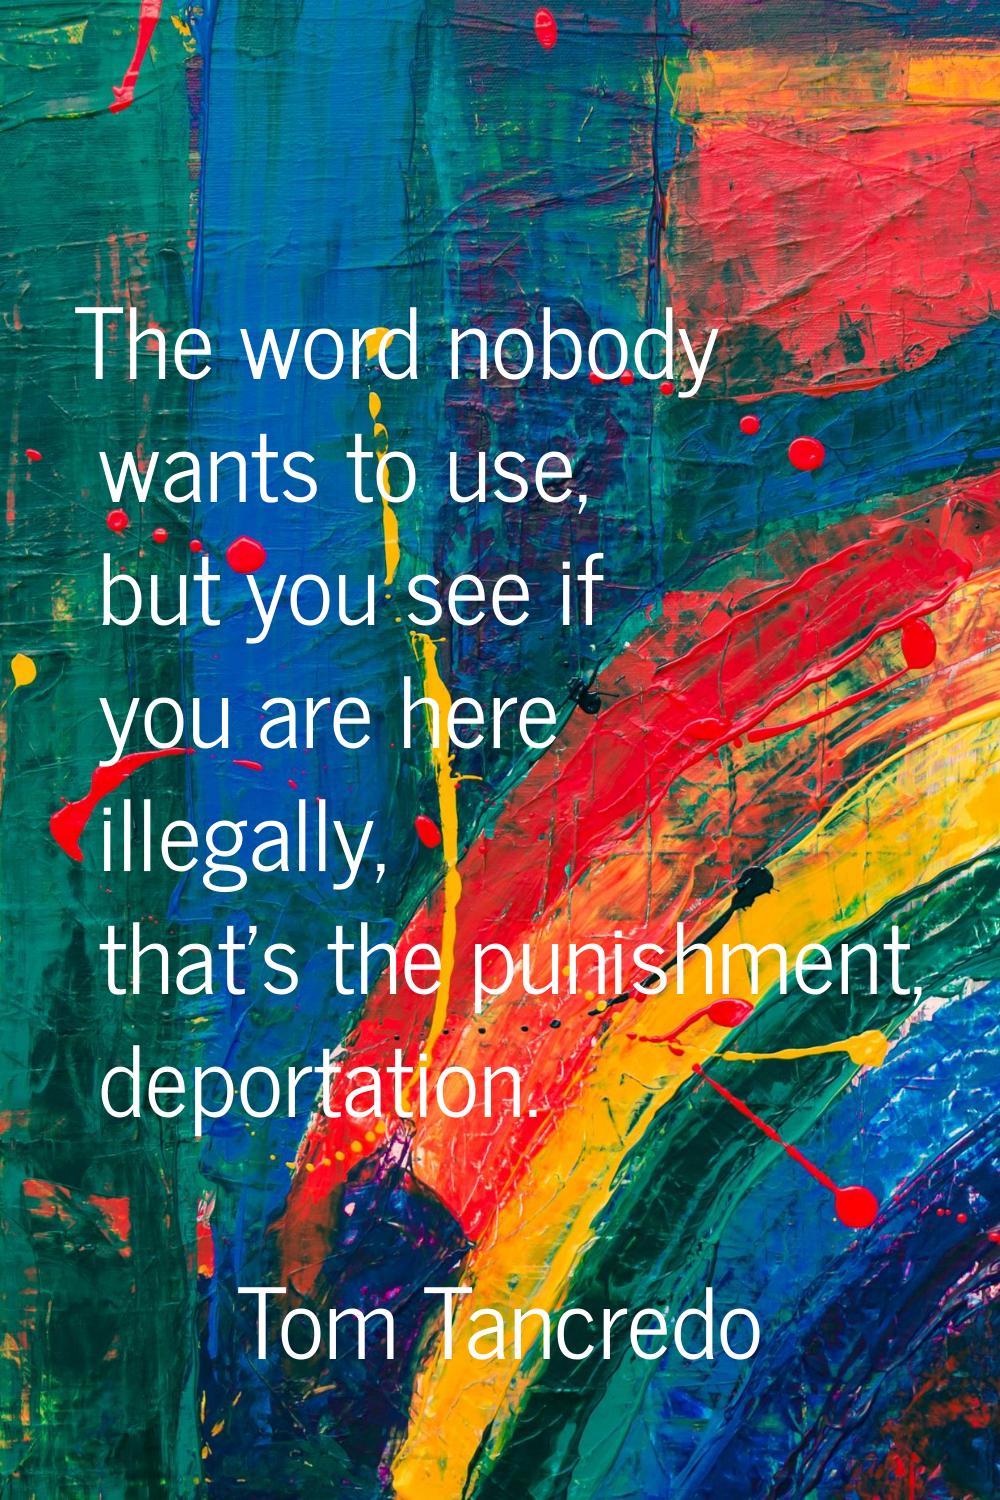 The word nobody wants to use, but you see if you are here illegally, that's the punishment, deporta